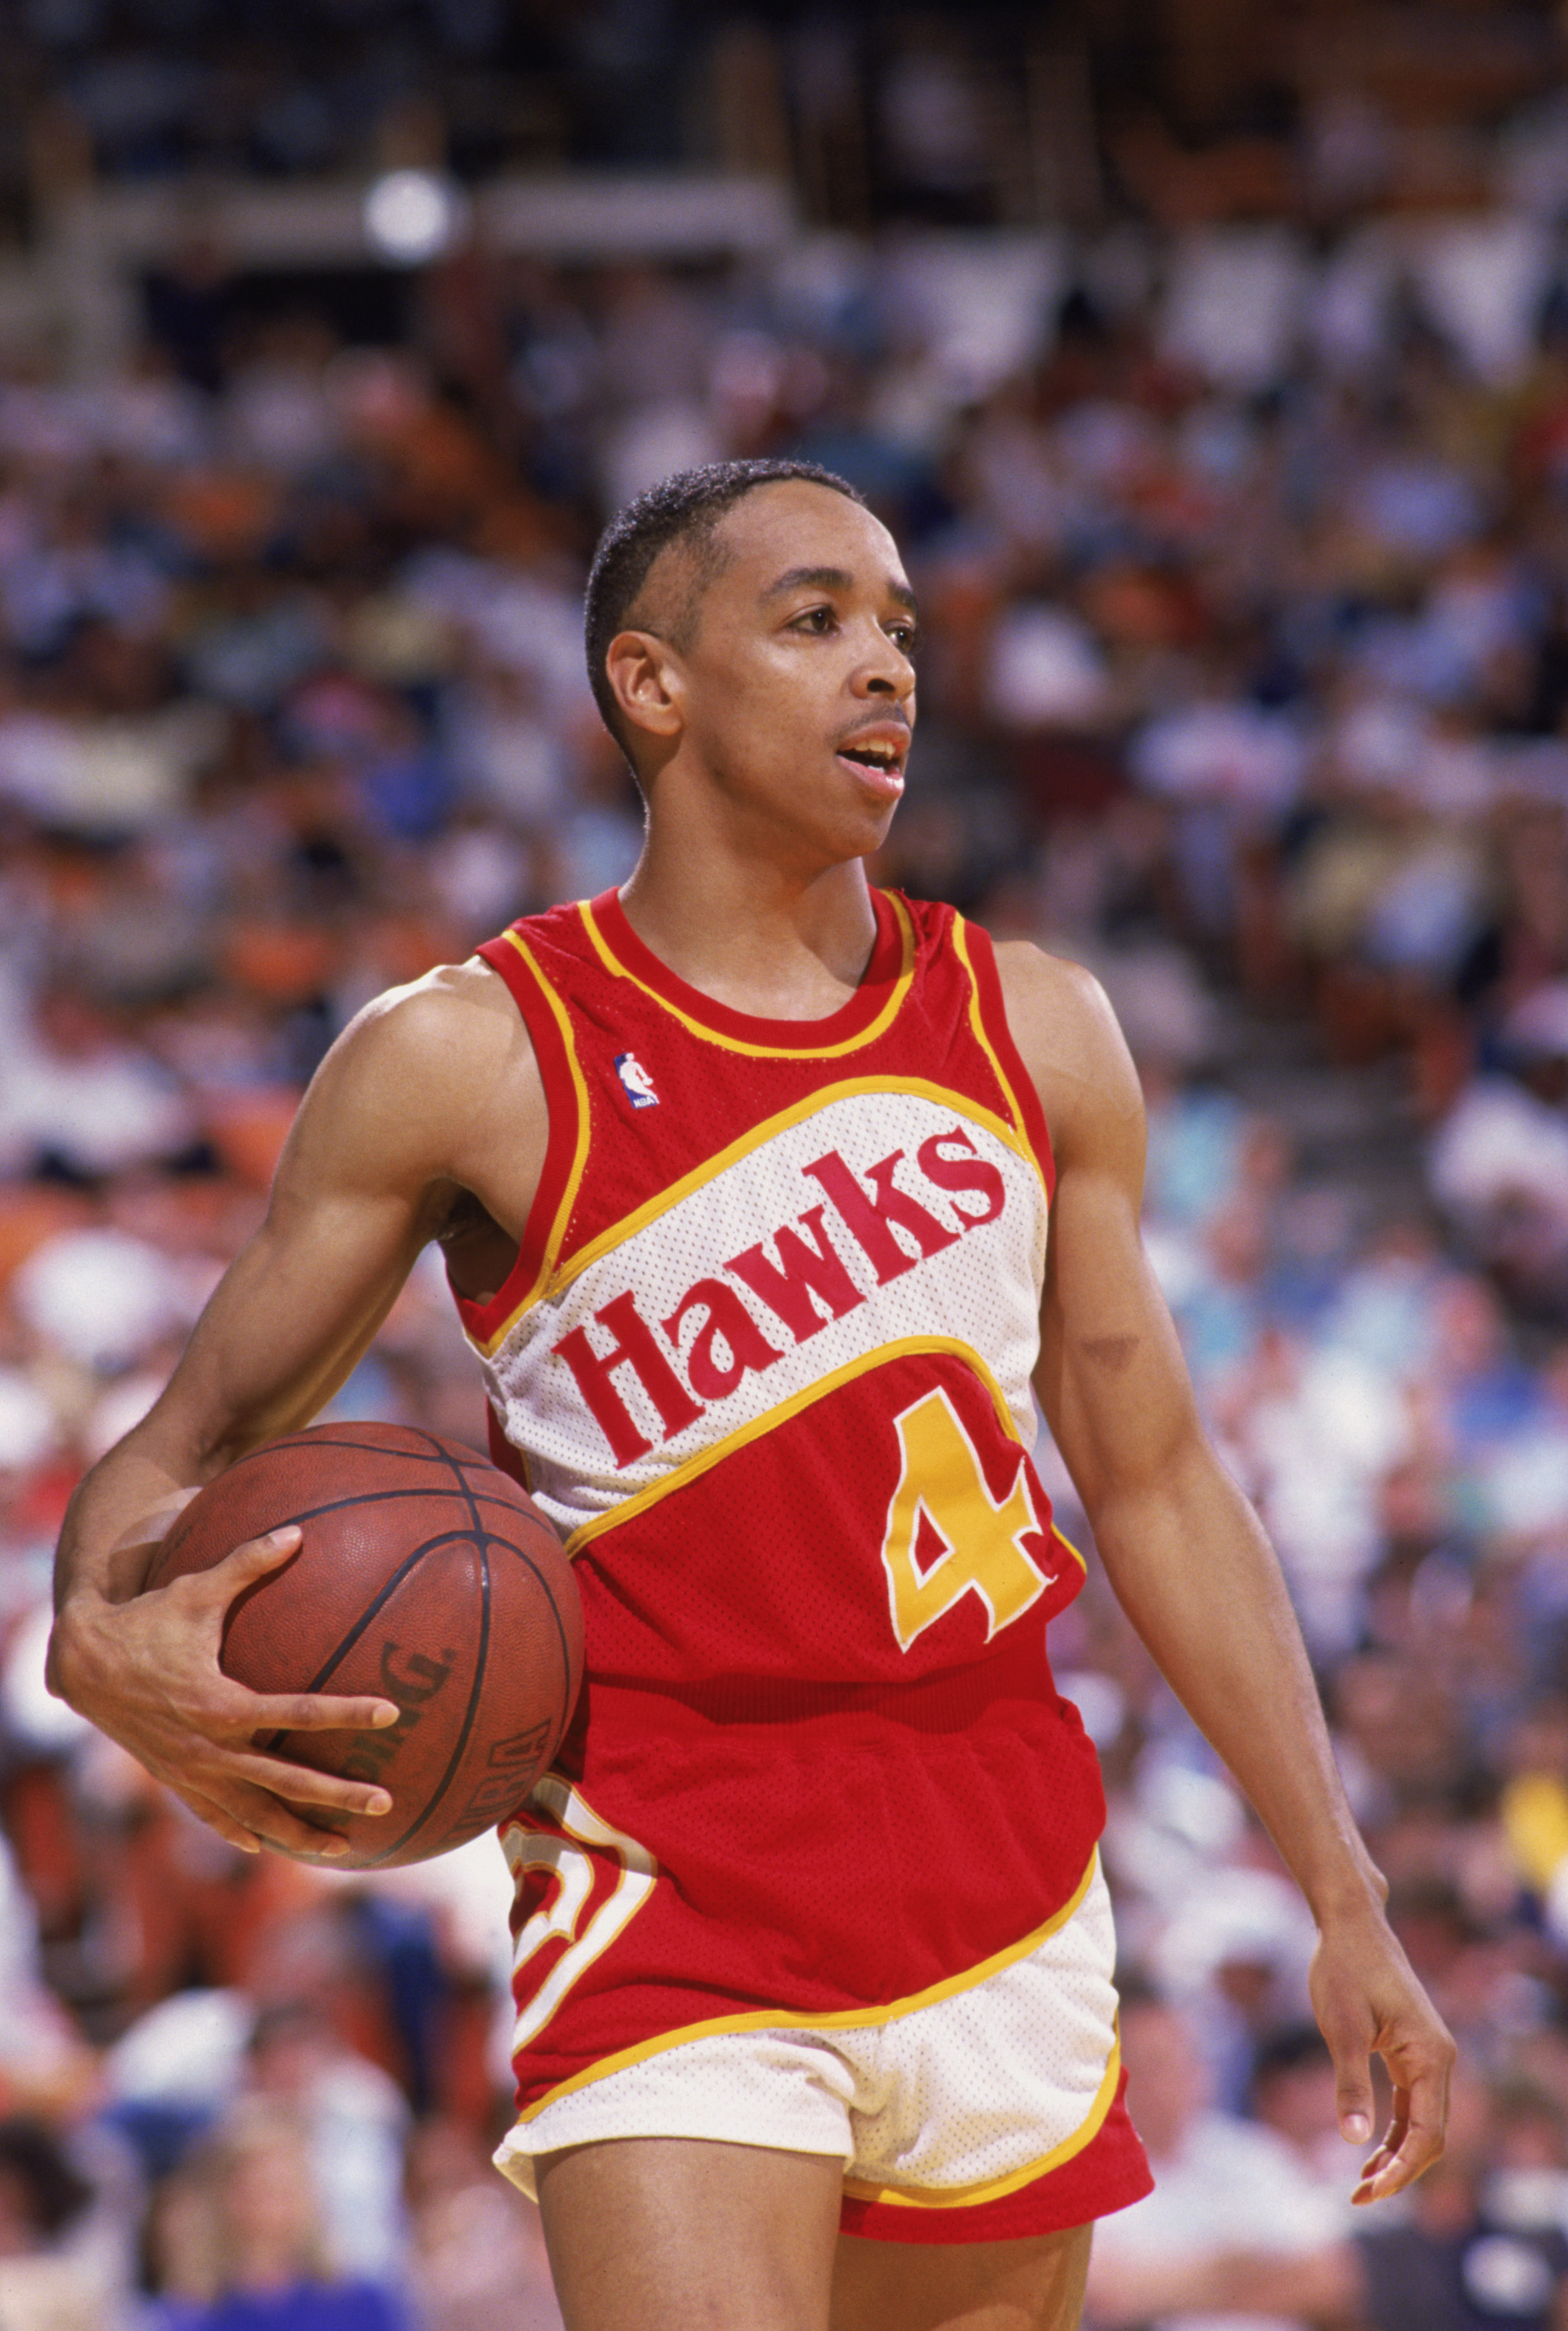 INGLEWOOD, CA - 1988:  Spud Webb #4 of the Atlanta Hawks holds the ball during a NBA game against the Los Angeles Lakers at the Great Western Forum in Inglewood, California in 1988.  (Photo by Mike Powell/Getty Images)